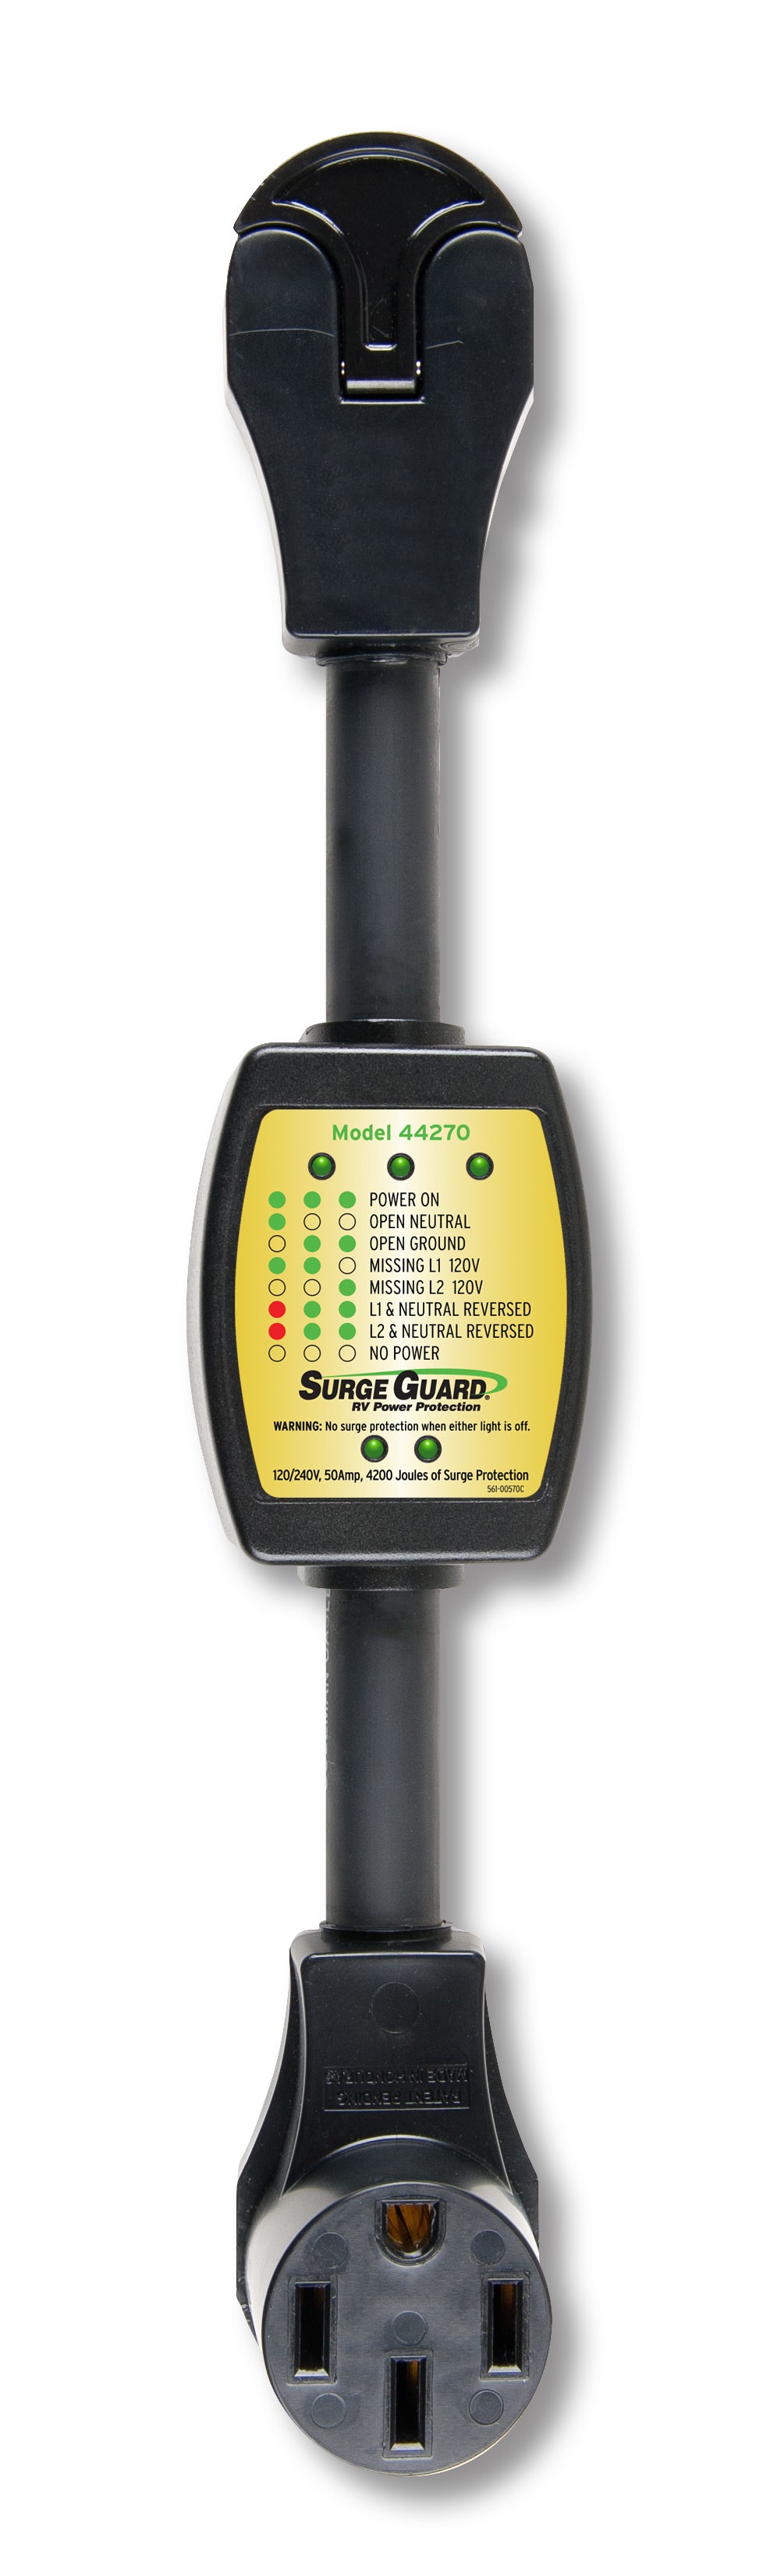 SouthWire Corp. Surge Guard ® 50 Amp Surge Protector